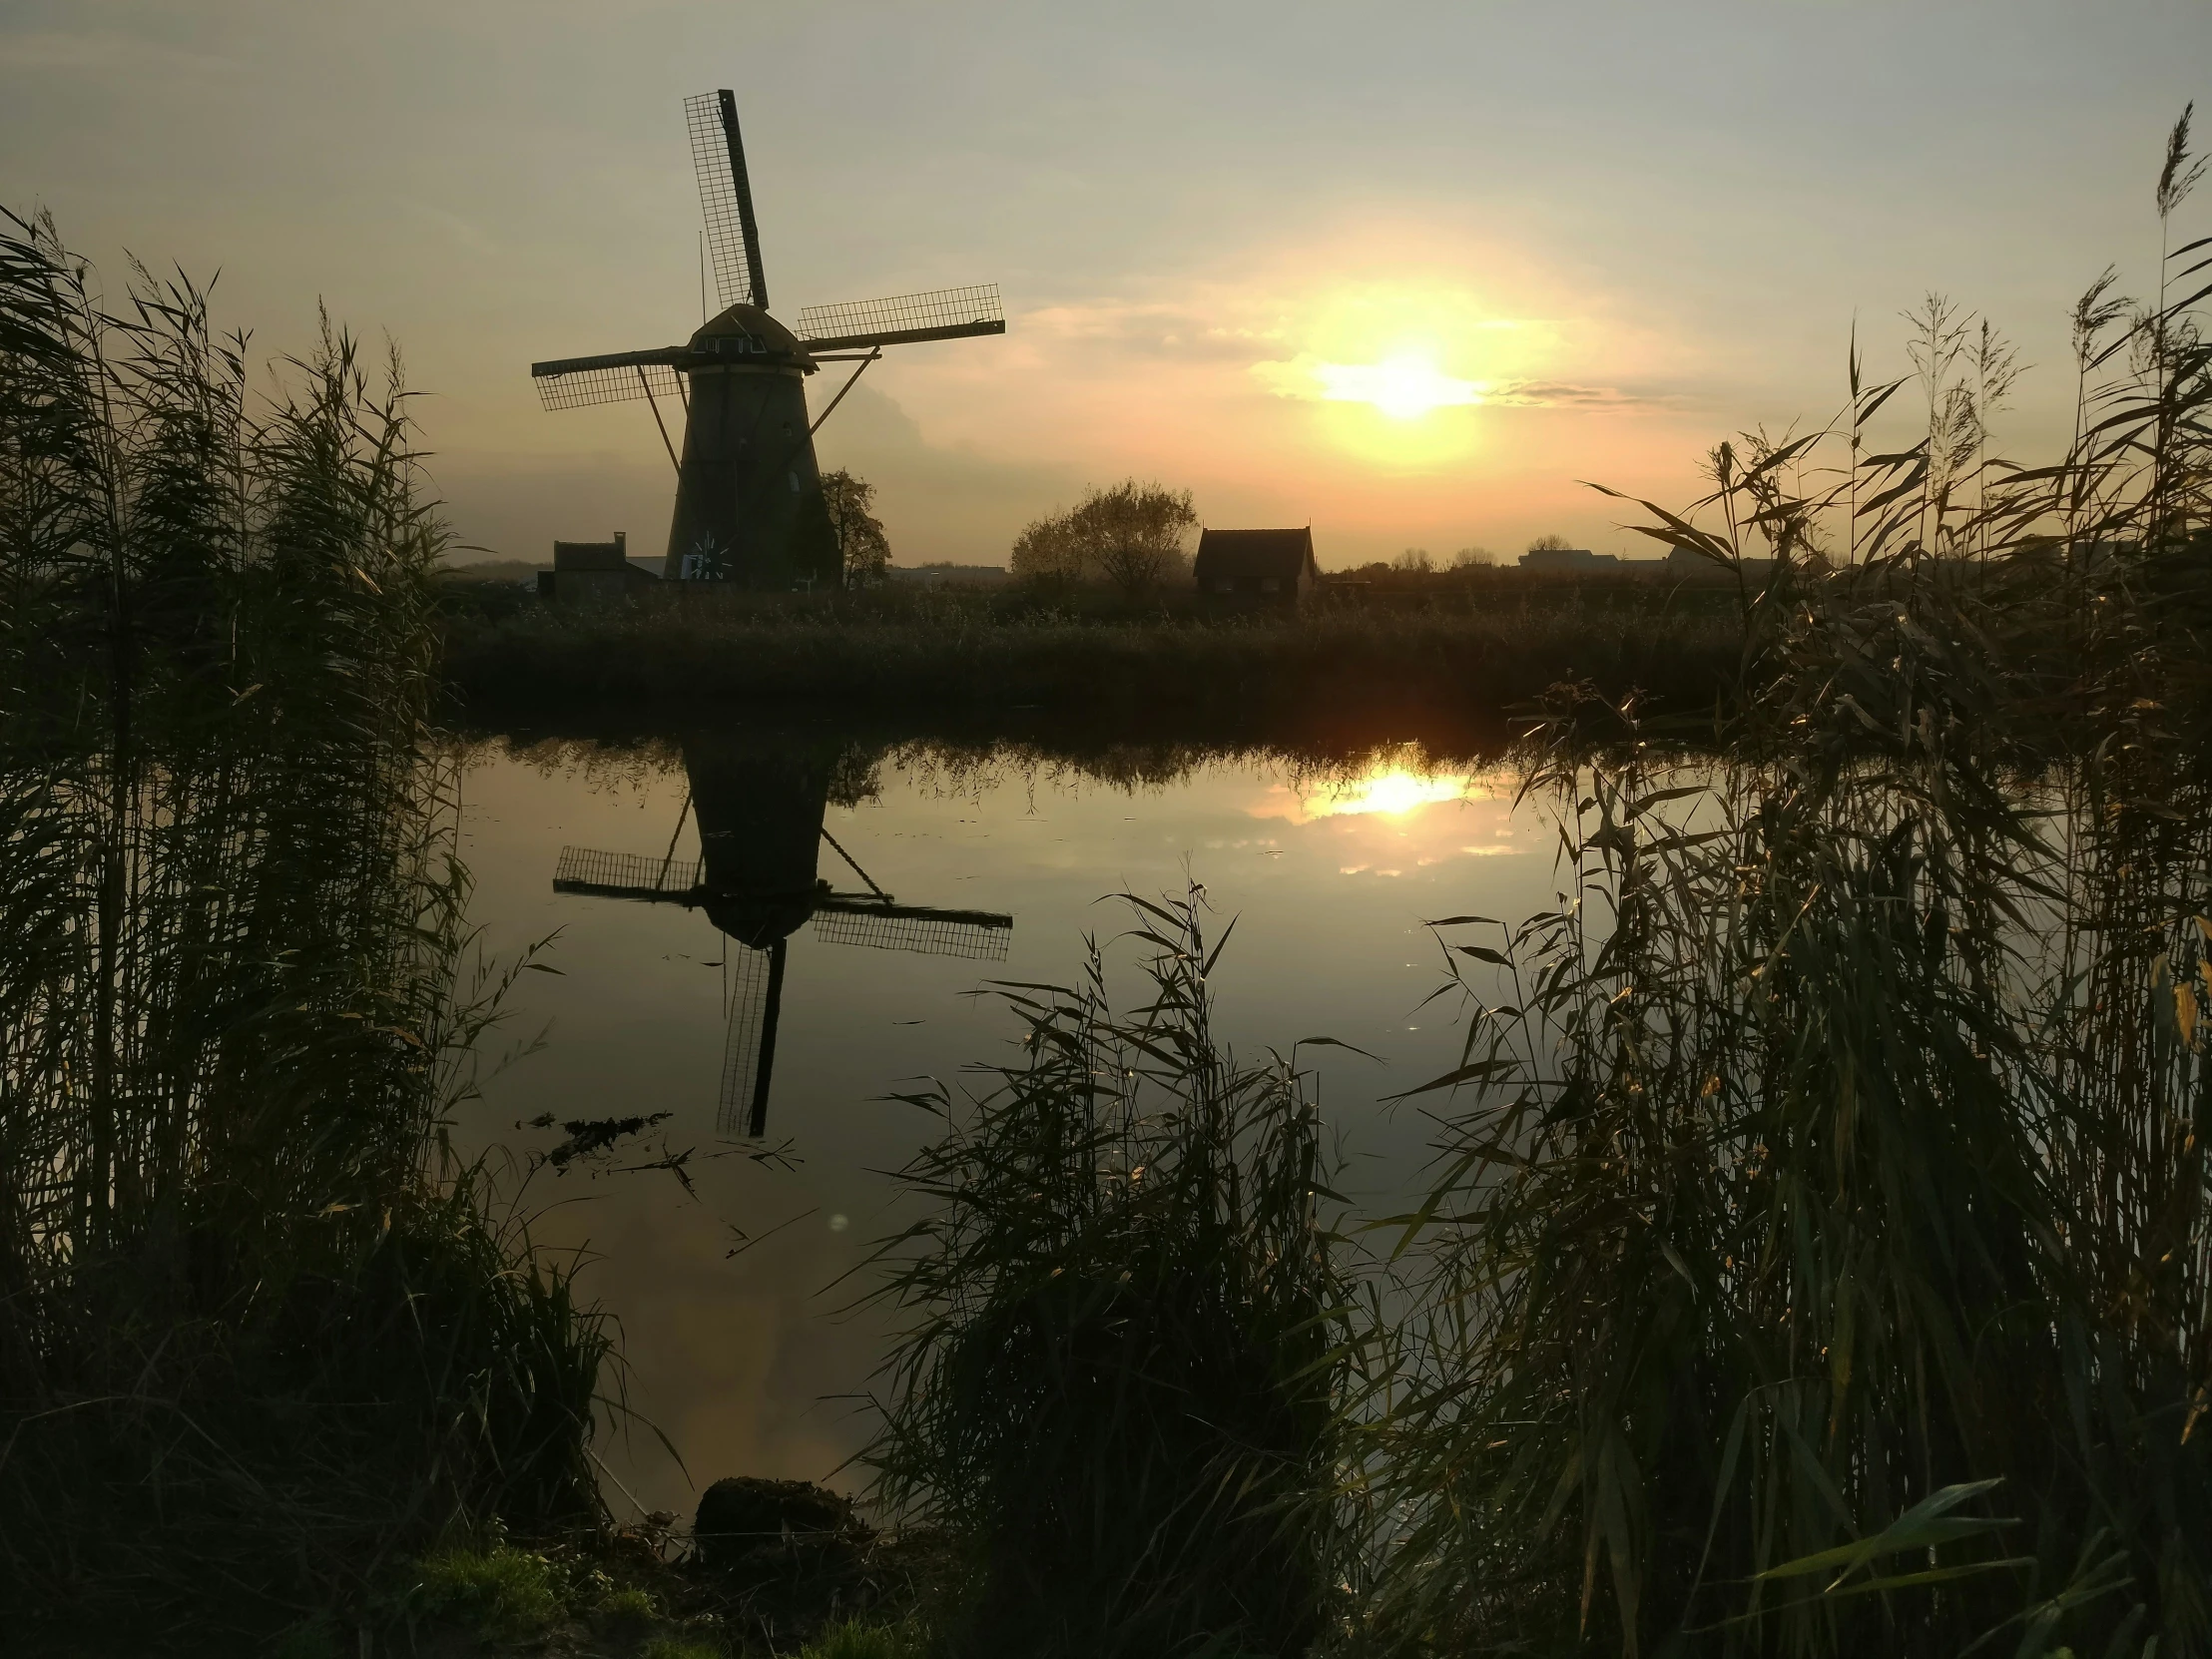 a windmill is standing in a body of water